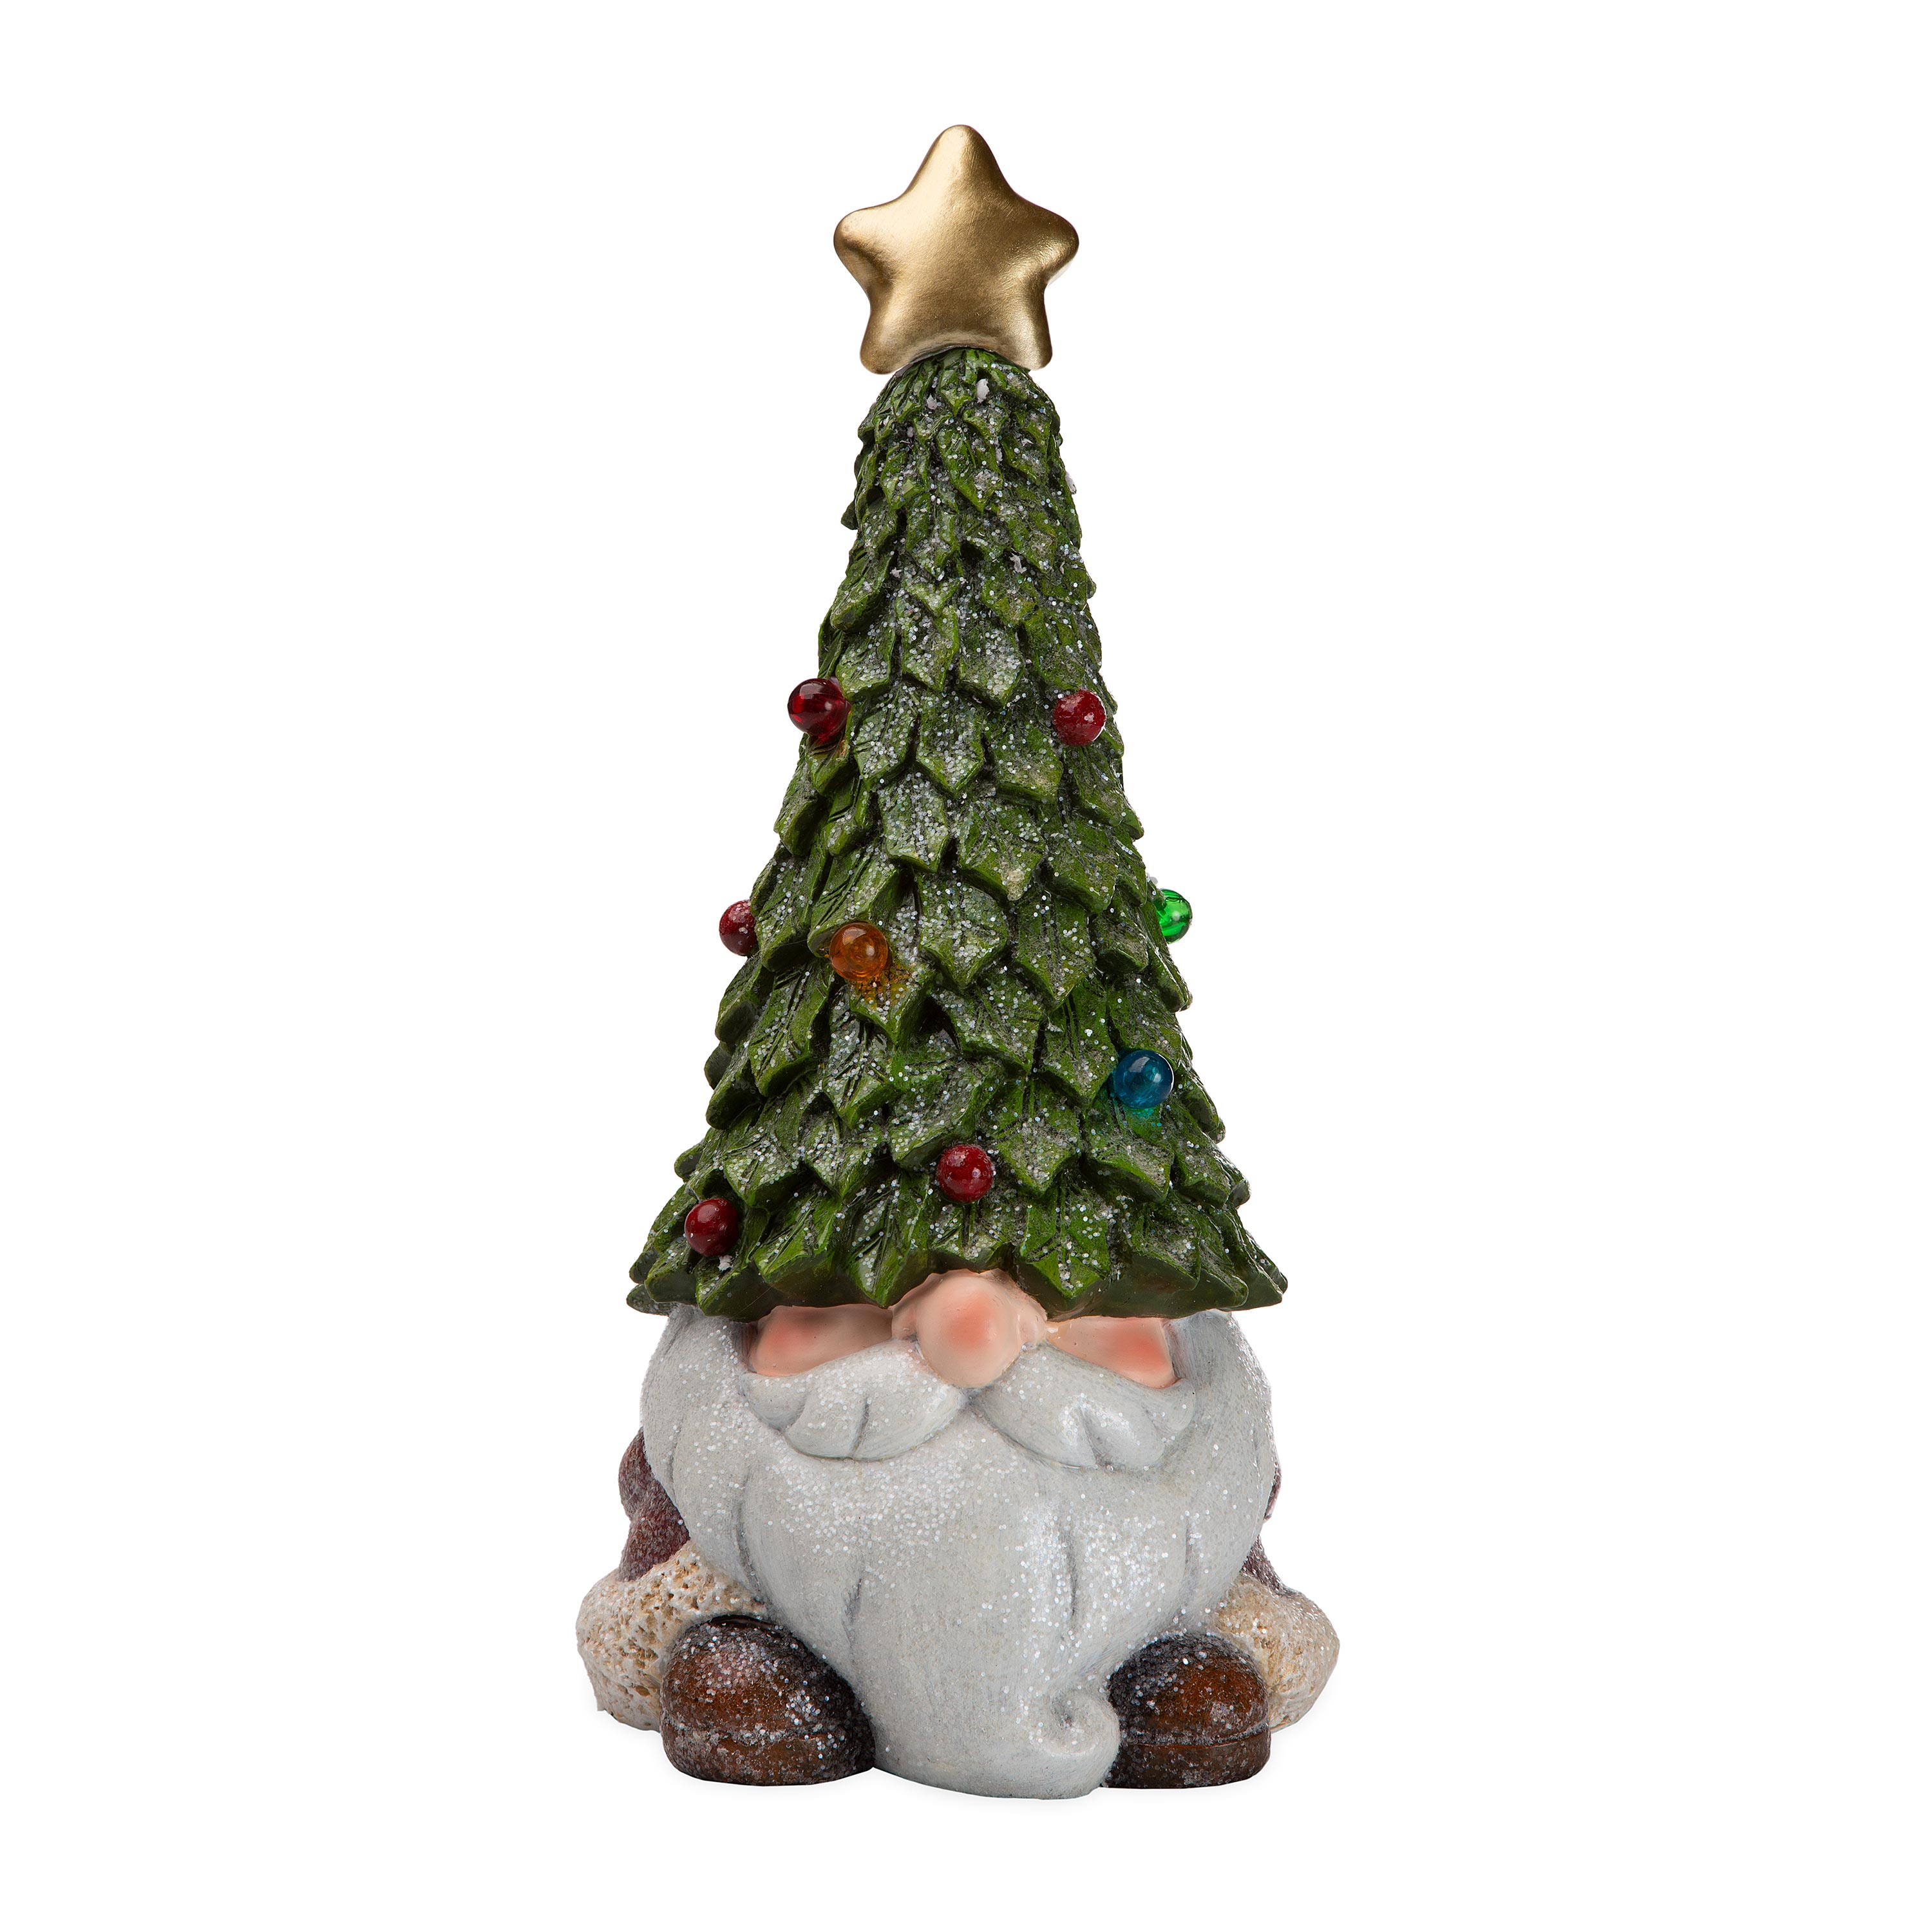 Lighted Holiday Garden Gnome Statue with Christmas Tree Hat